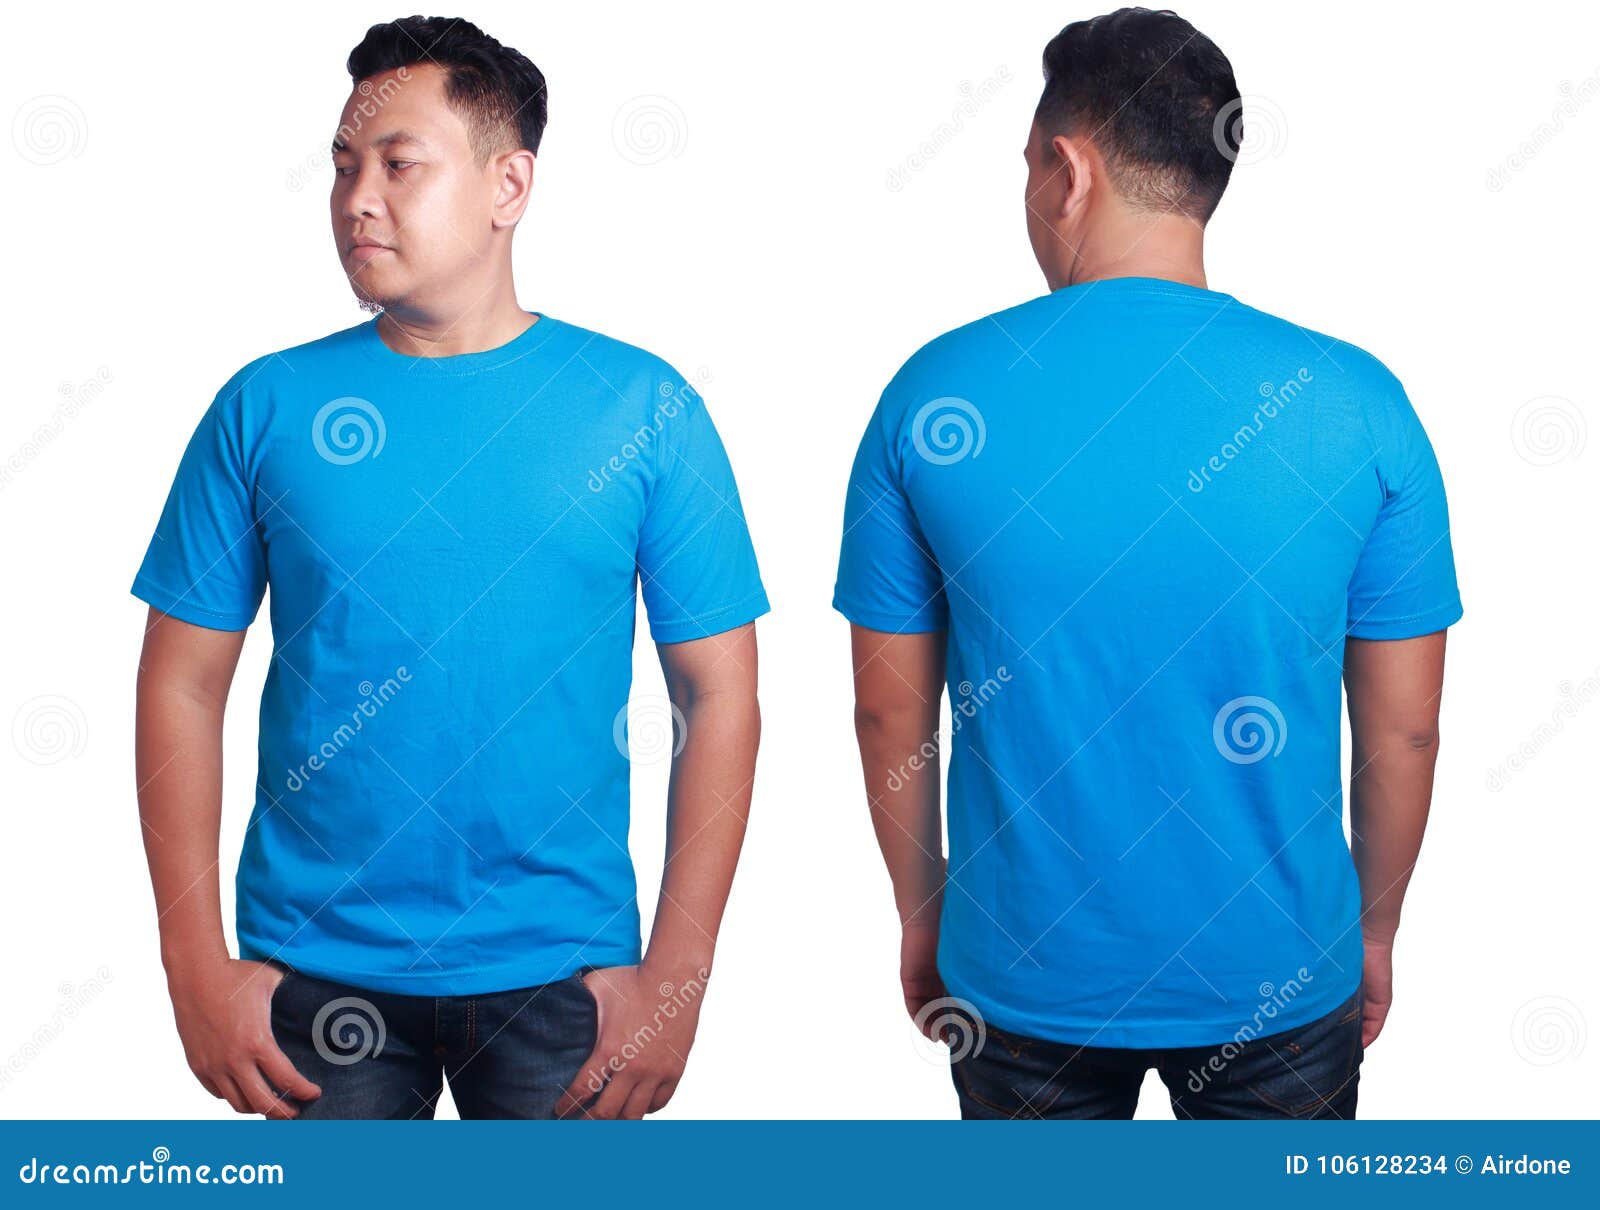 Blue shirt mockup template stock photo. Image of front - 106128234